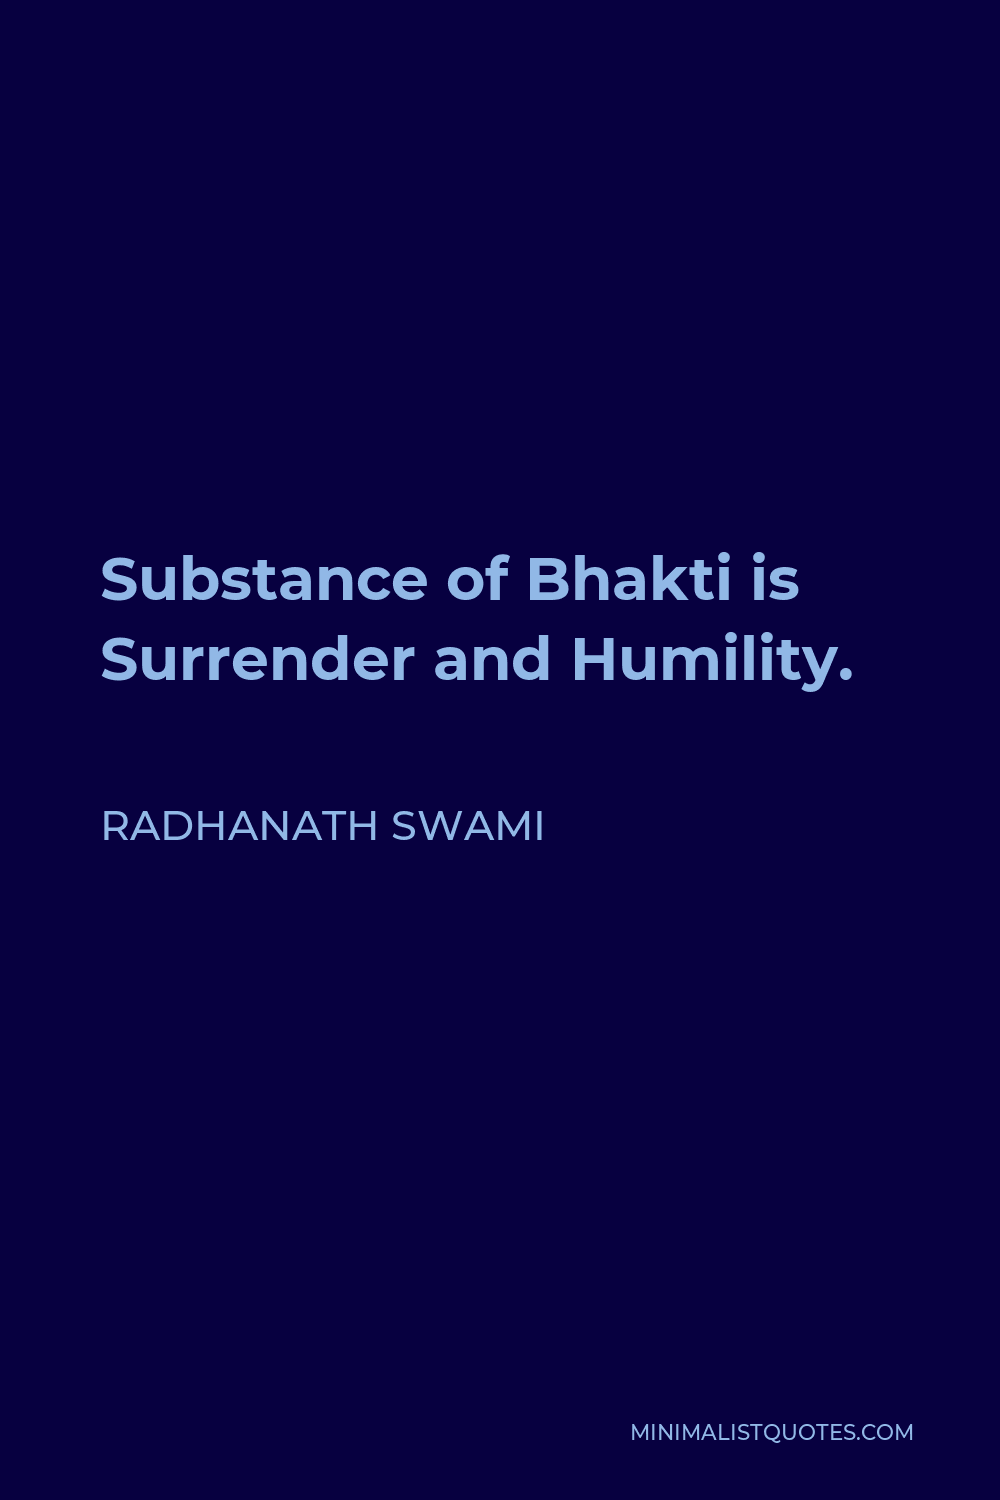 Radhanath Swami Quote - Substance of Bhakti is Surrender and Humility.